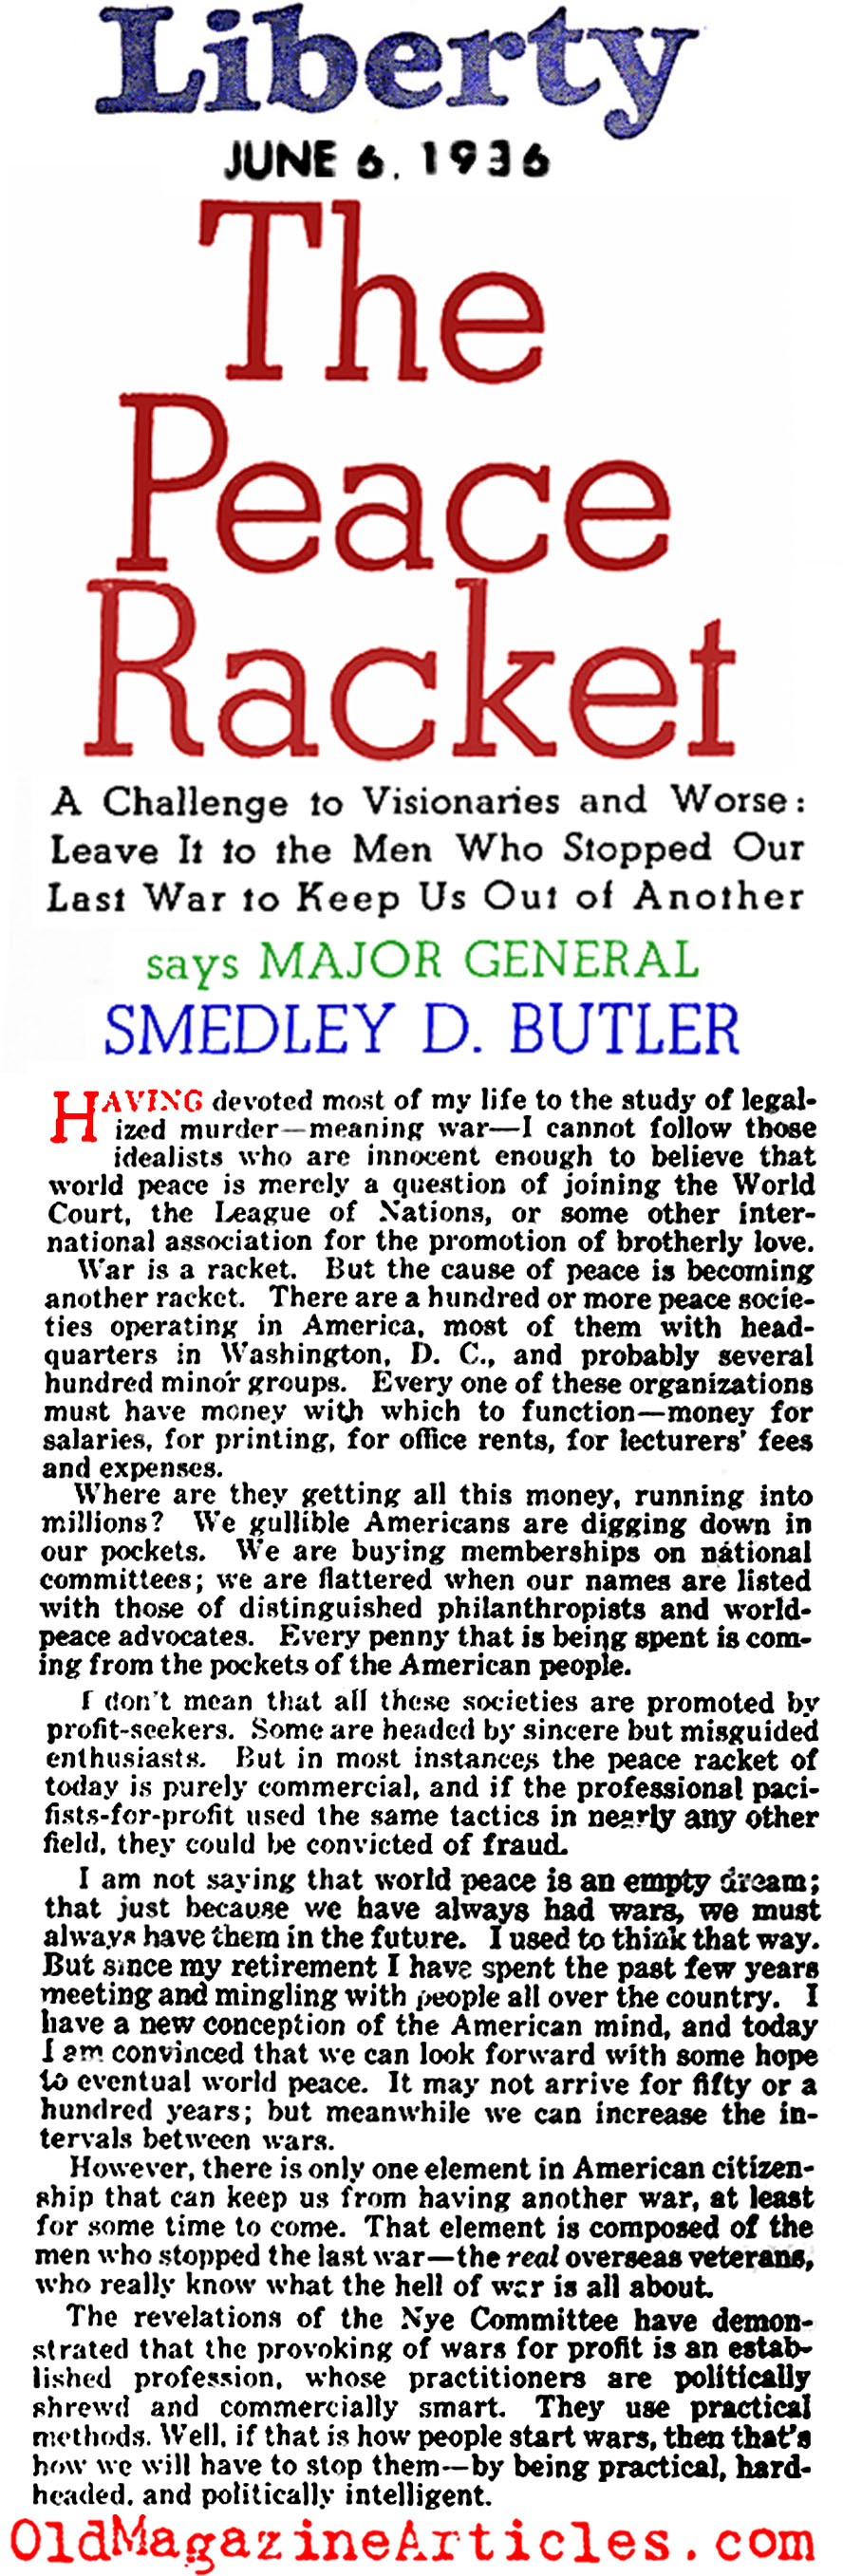 General Smedley Butler on Peace (Liberty Magazine, 1936)